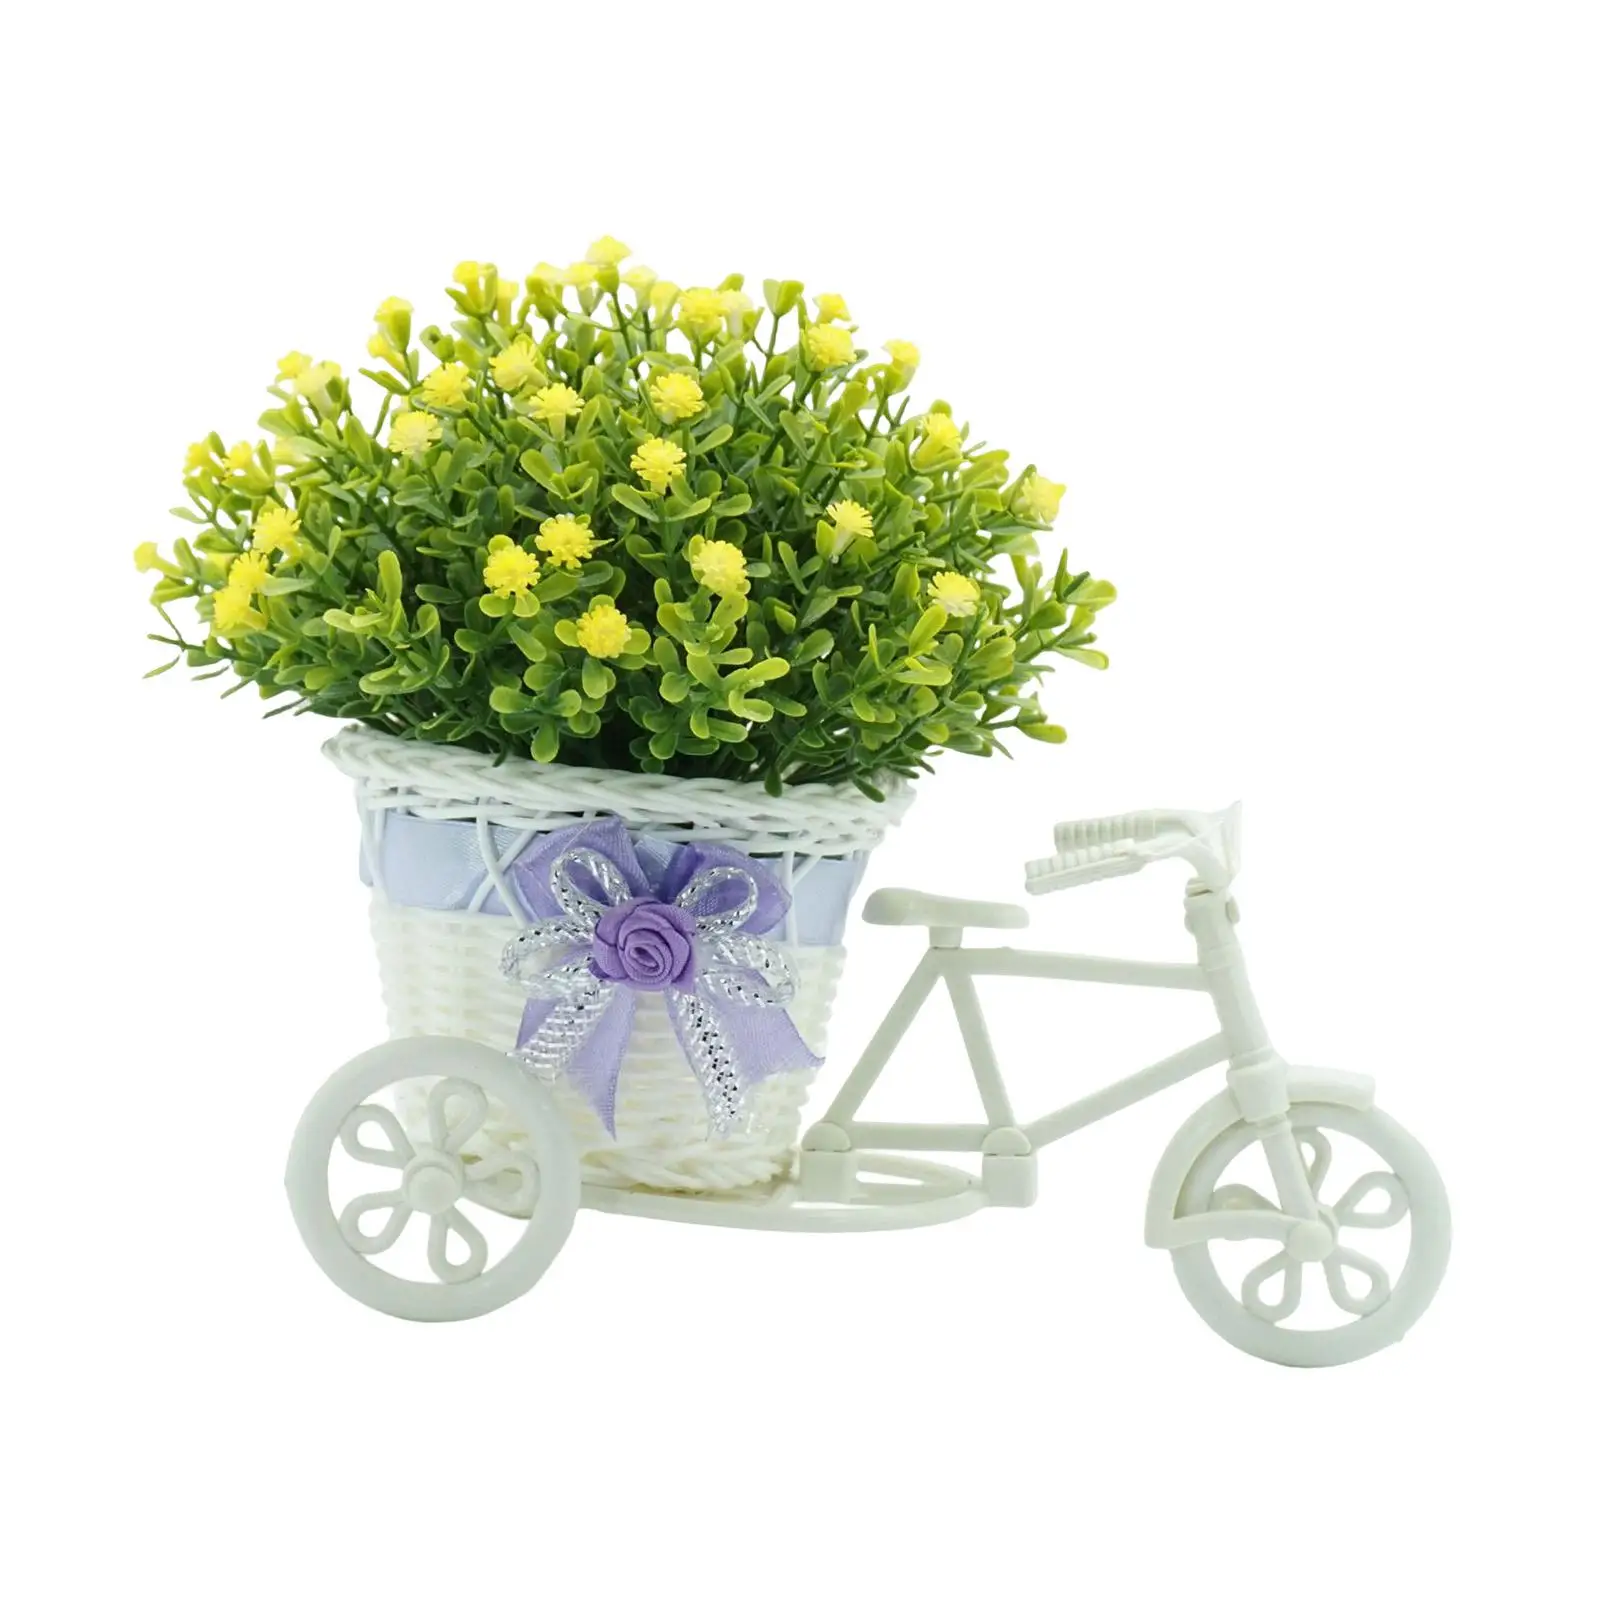 Flower Basket Container Tricycle Photo Props Modern for Backyard Table Patio